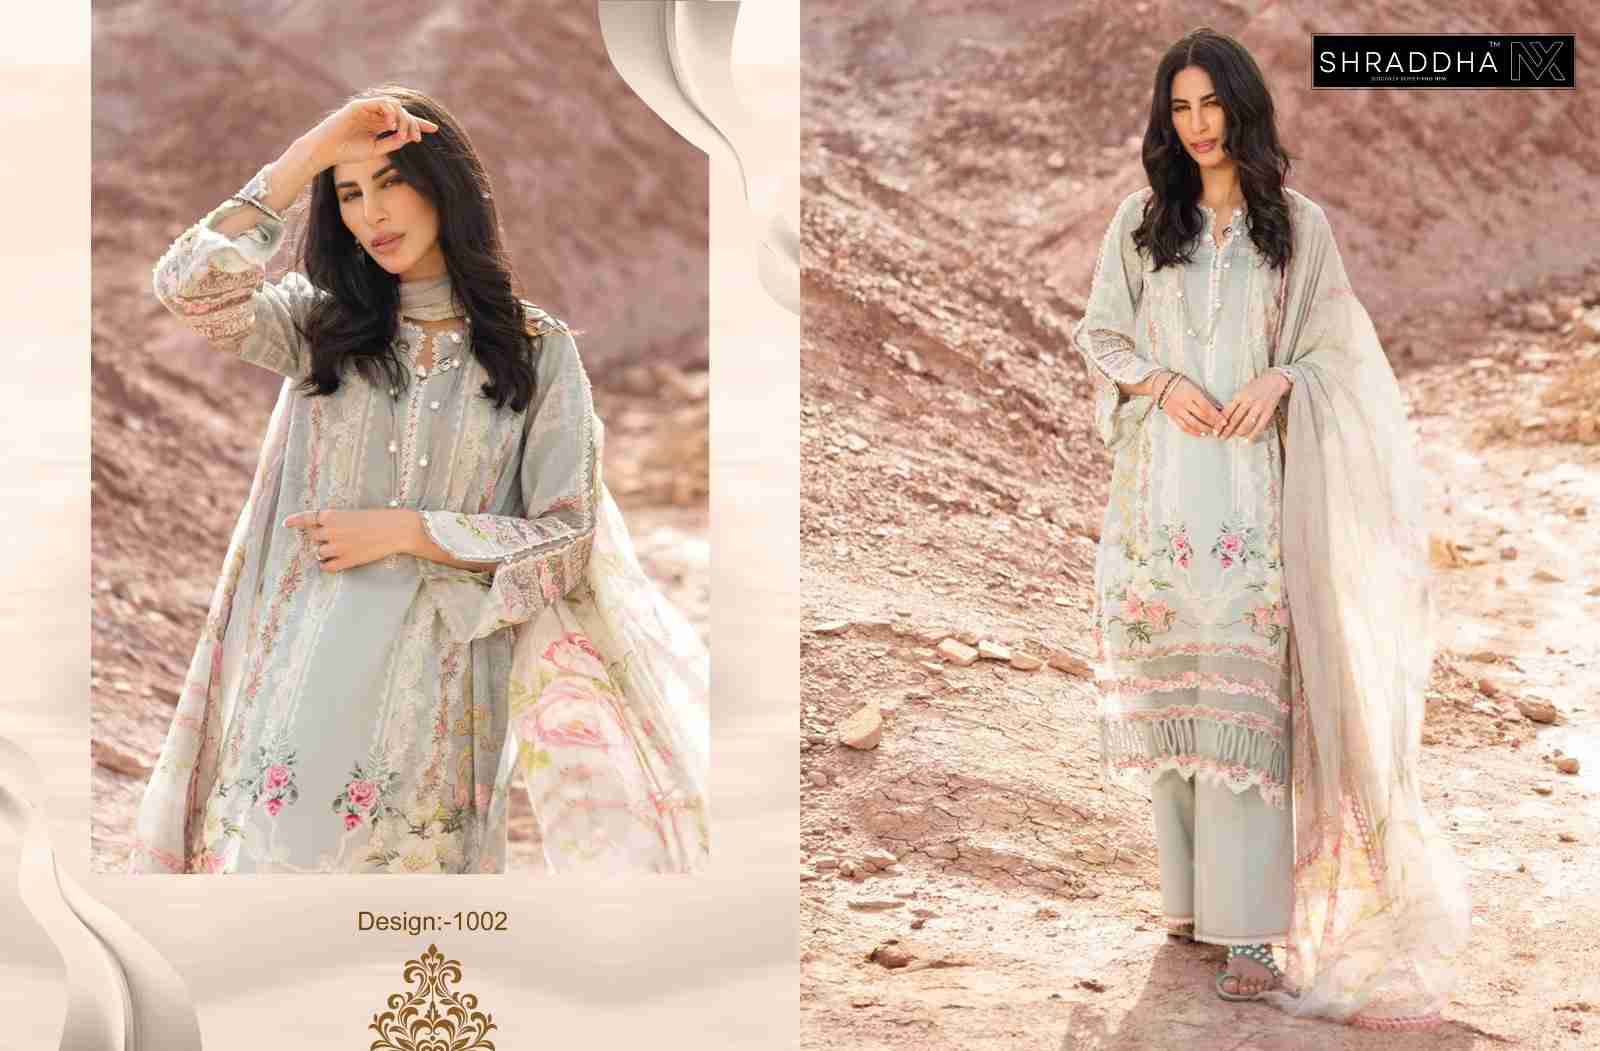 Shraddha nx queen court vol 1 nx lawn cotton with embroidery patch work Cotton dupatta pakistani suits in surat - jilaniwholesalesuit